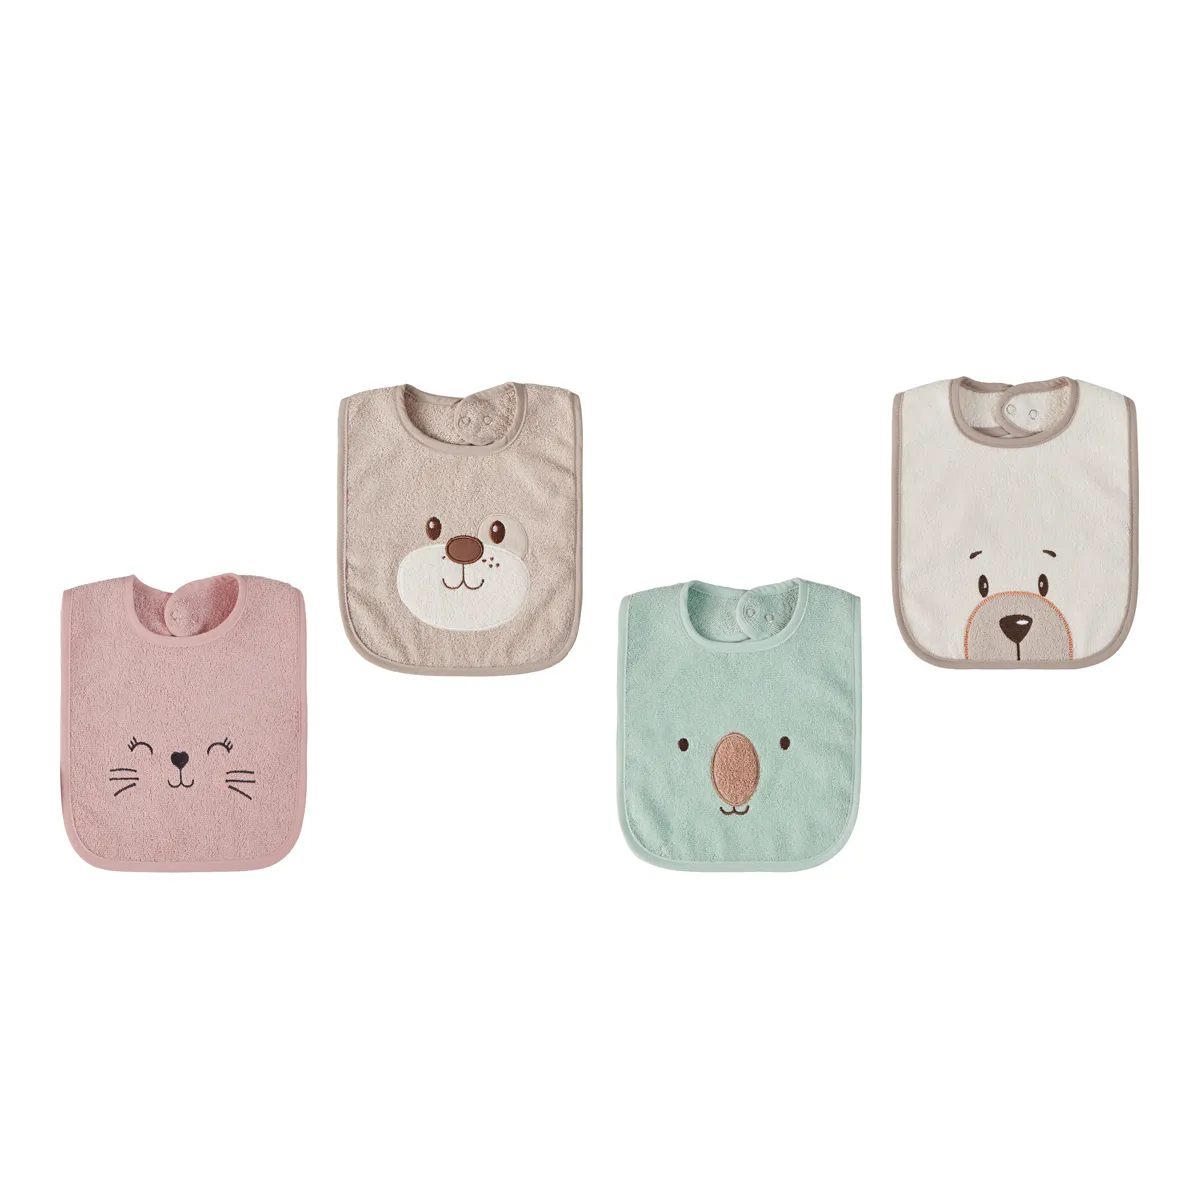 Absorbent Terry Baby Bibs Made of Soft Terry Cotton Fabric Pure Natural Sustainable Ecological